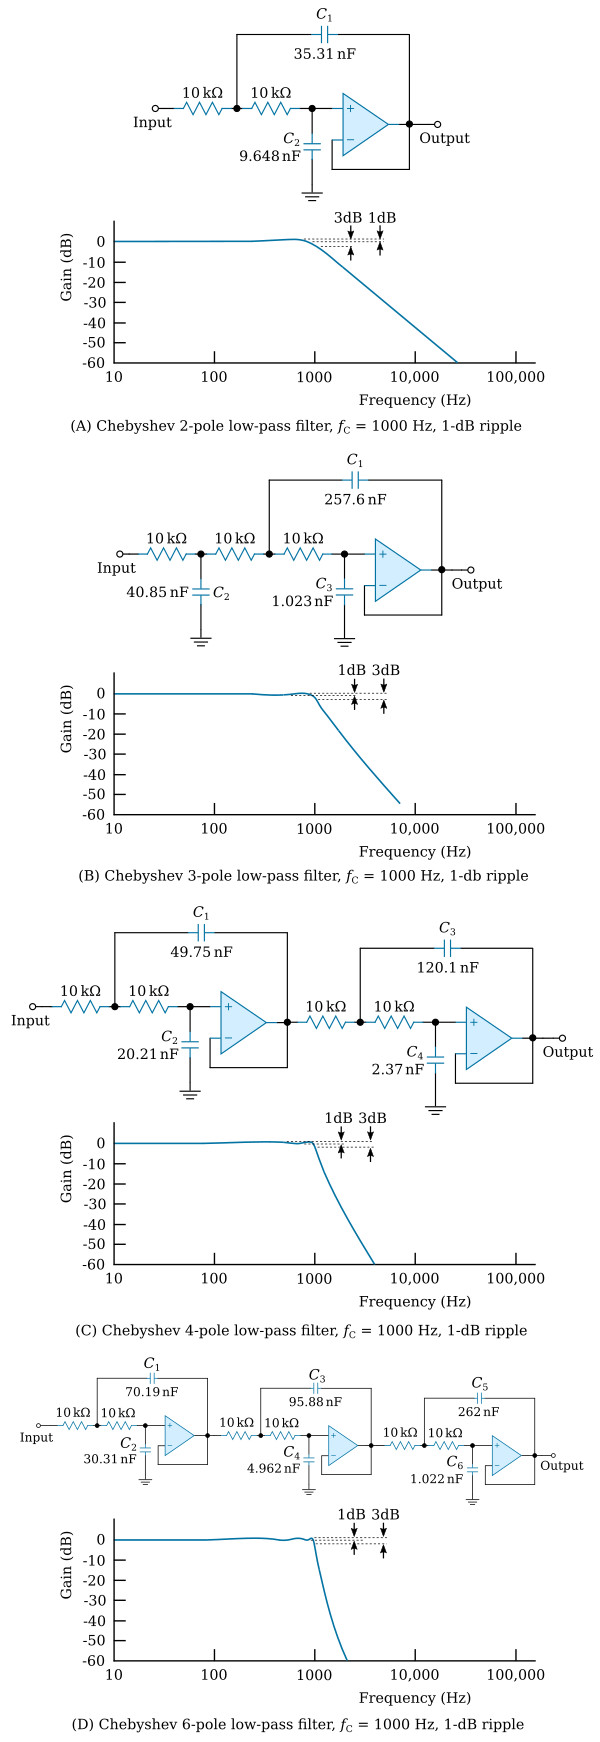 Chebyshev low-pass filters